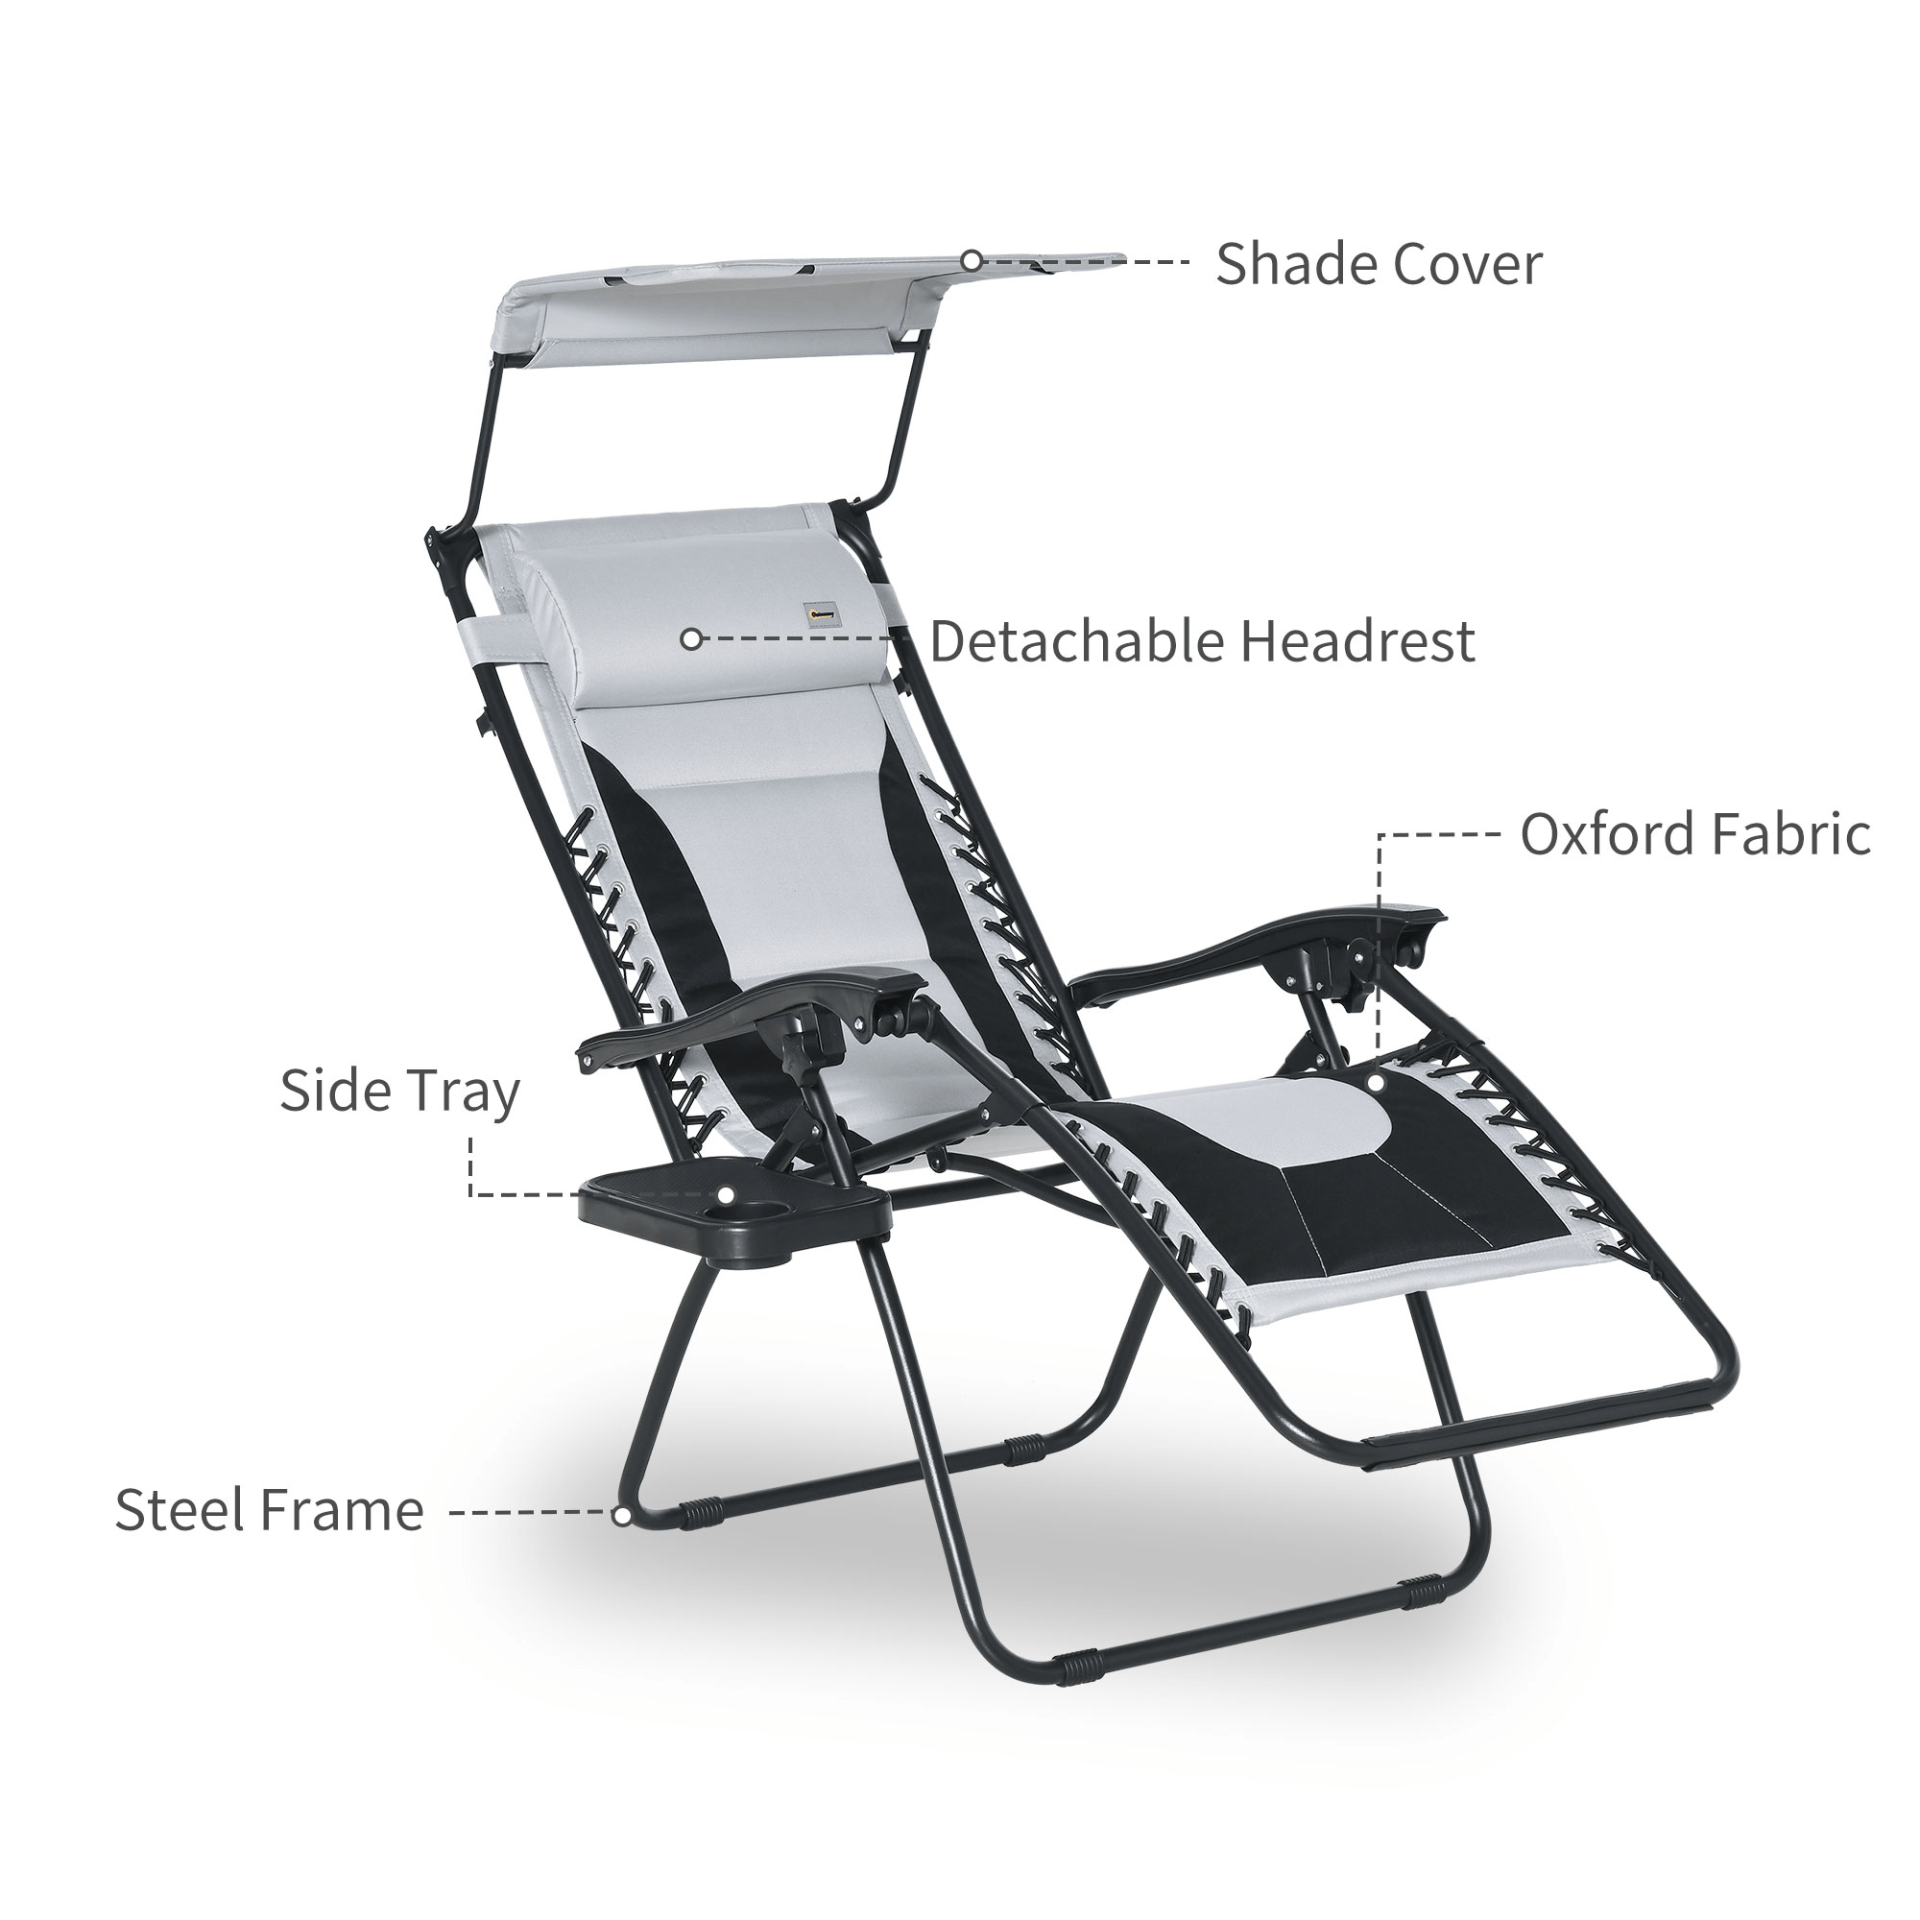 Outsunny Zero Gravity Lounger Chair with Shade Cover, Cup Holder, Soft Cushion - Grey Camping Chair Cosy Camping Co.   